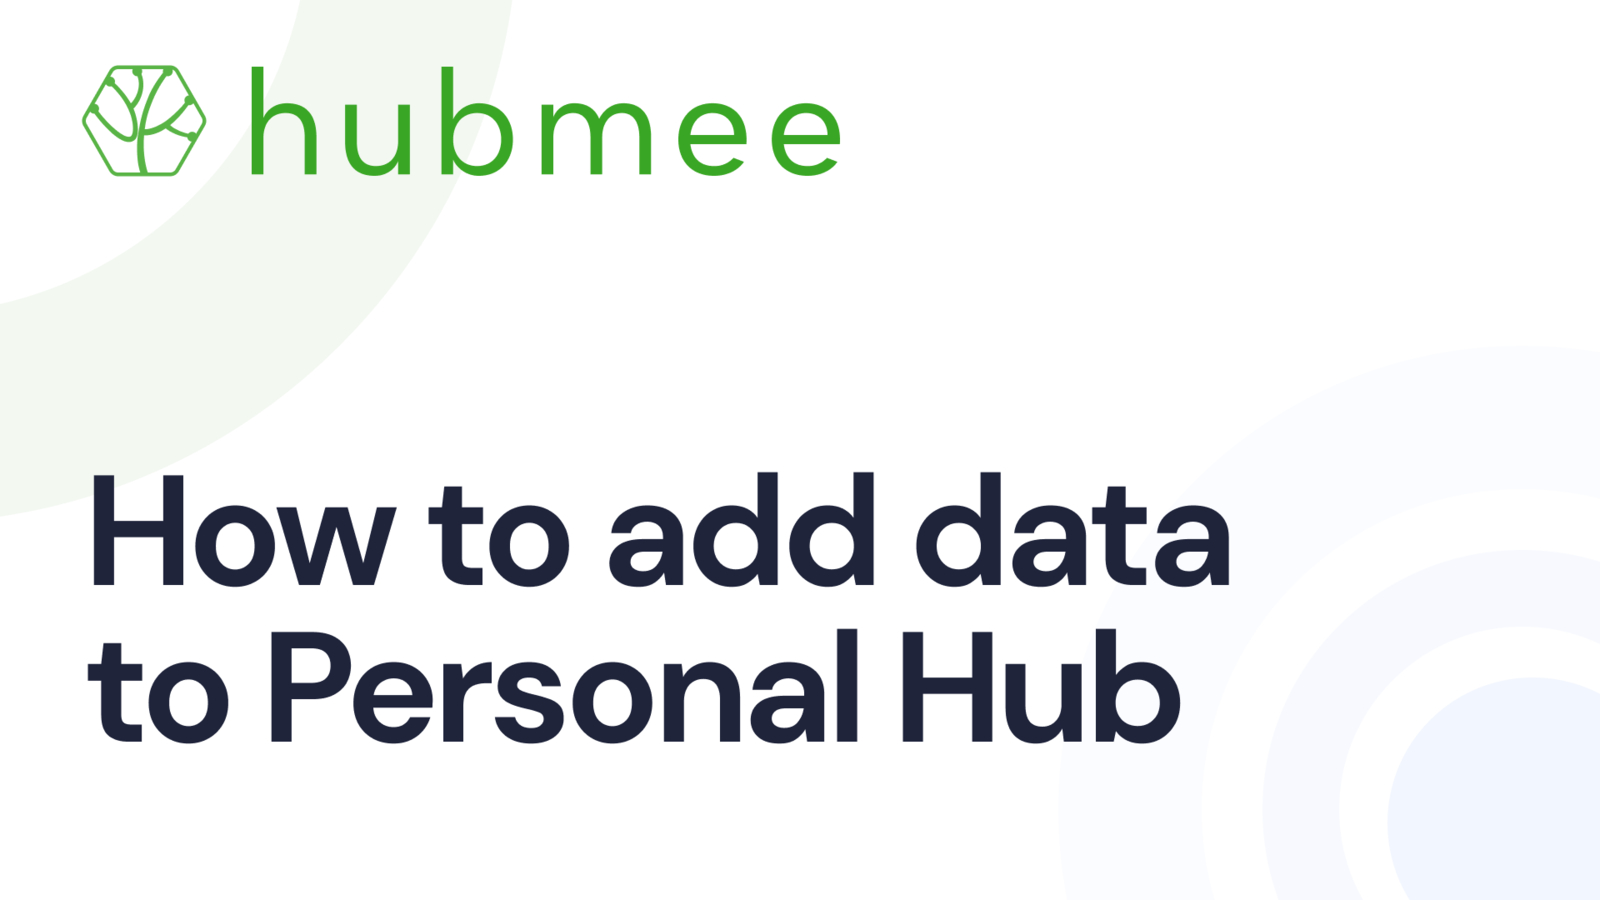 How to add data to Hubmee’s Personal Hub